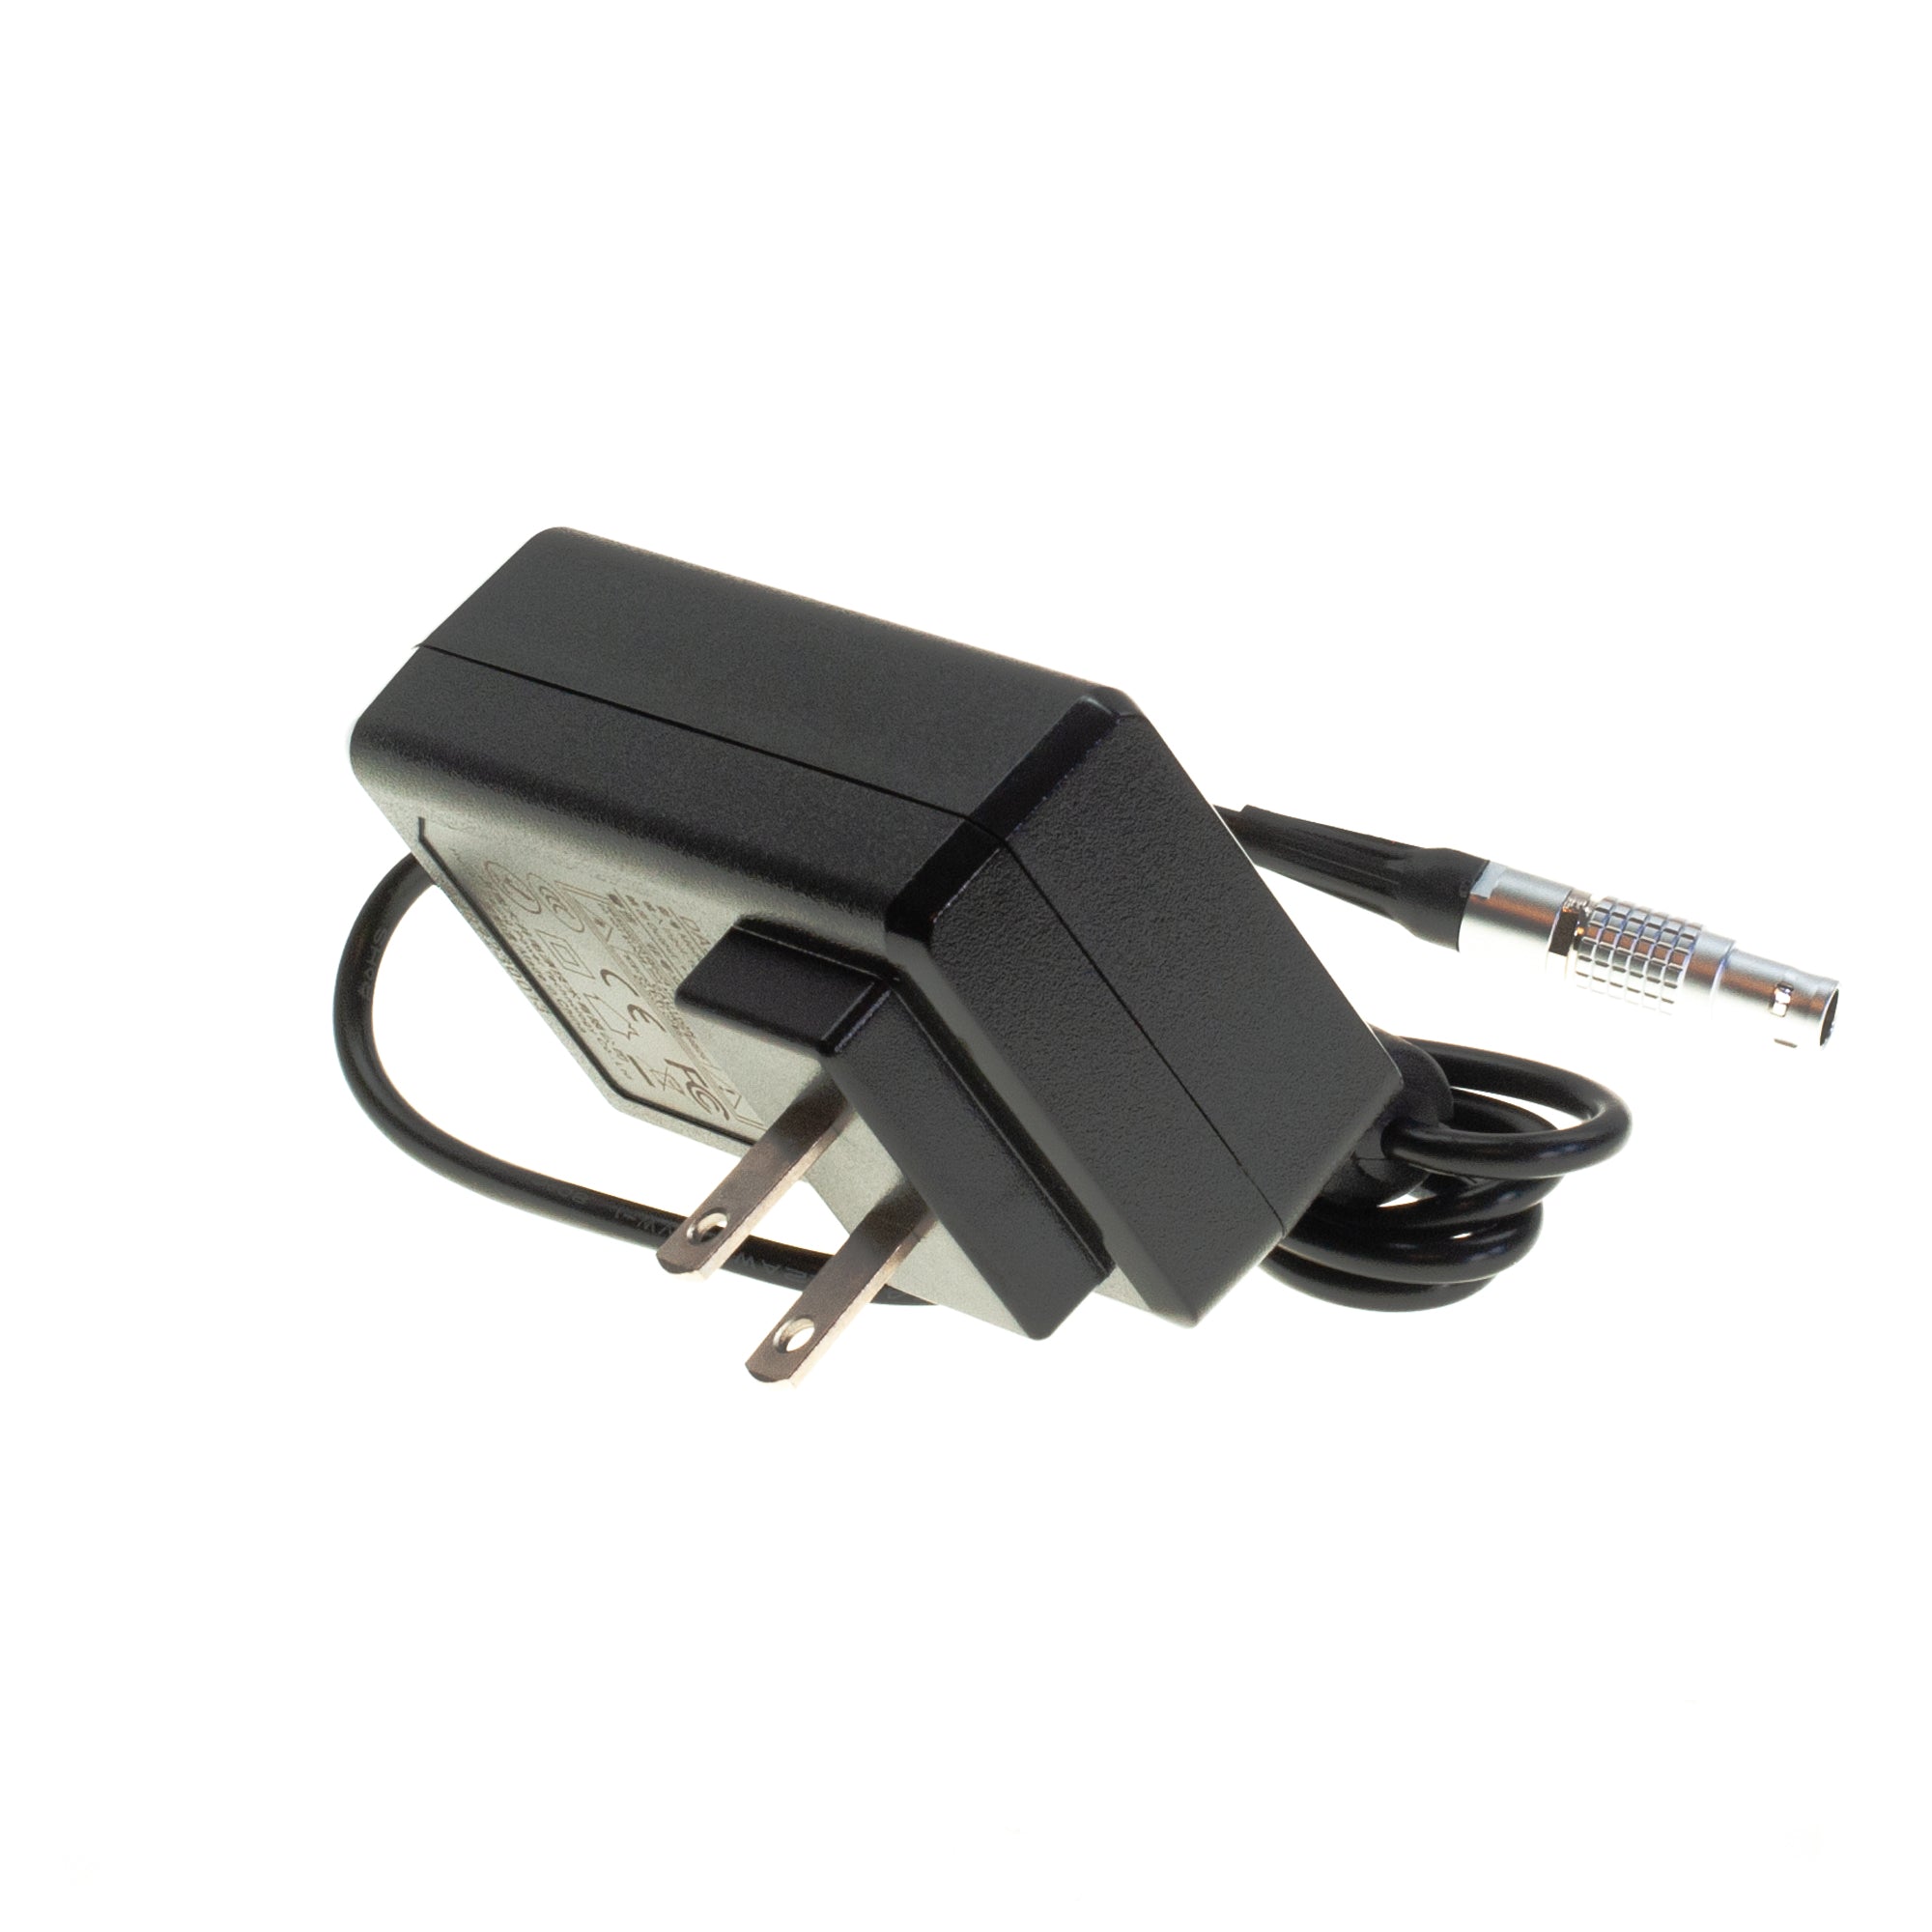 AC to DC Adapter for all Ghost Eye Wireless Video Transmission Systems